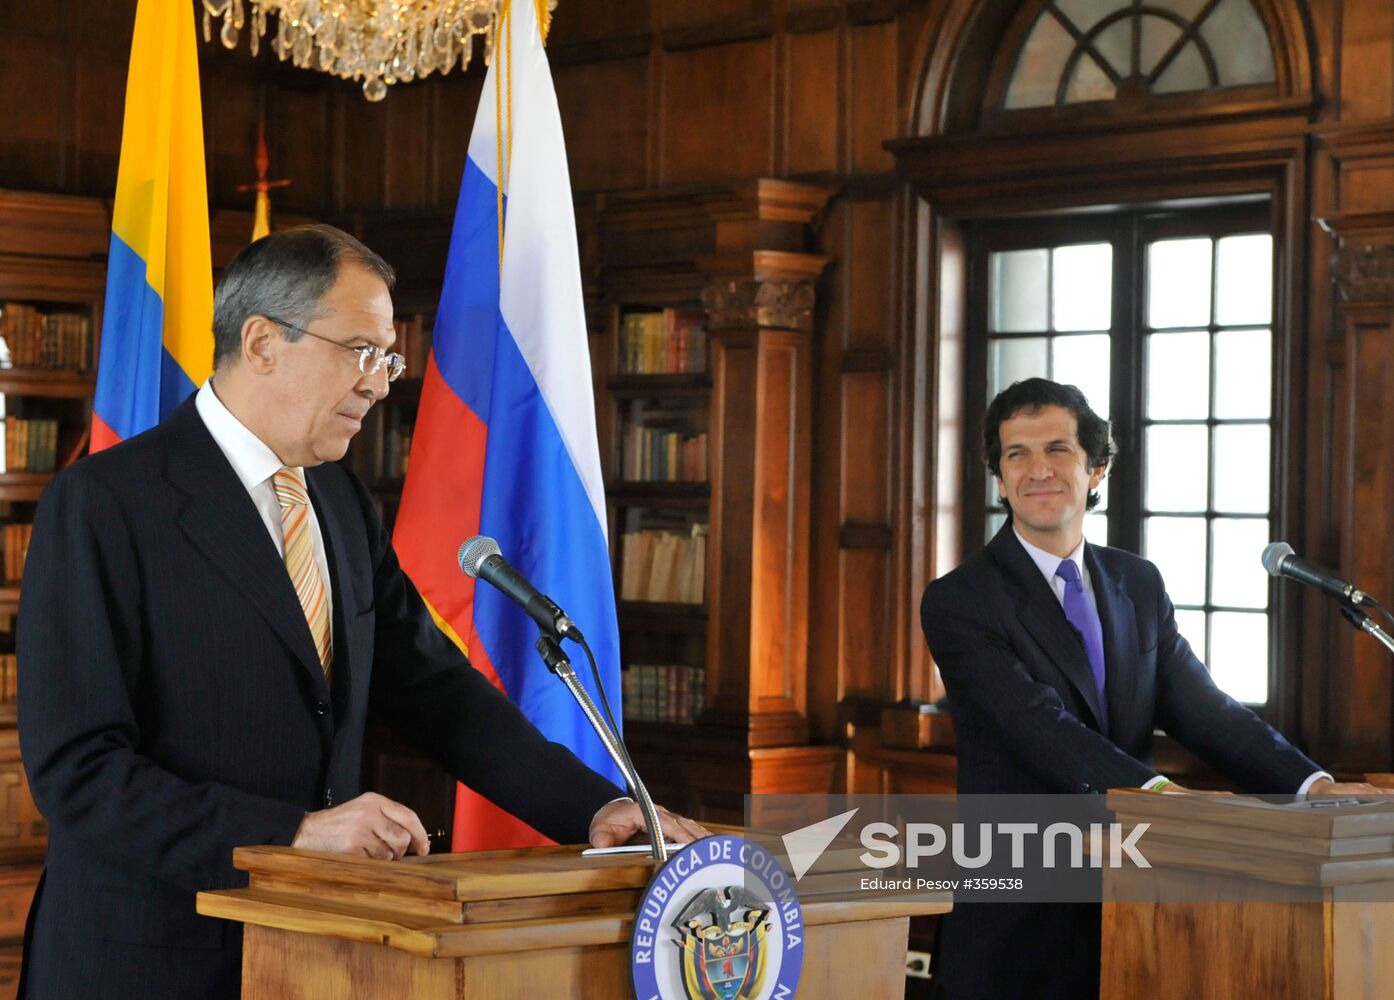 Sergei Lavrov's visit to Colombia